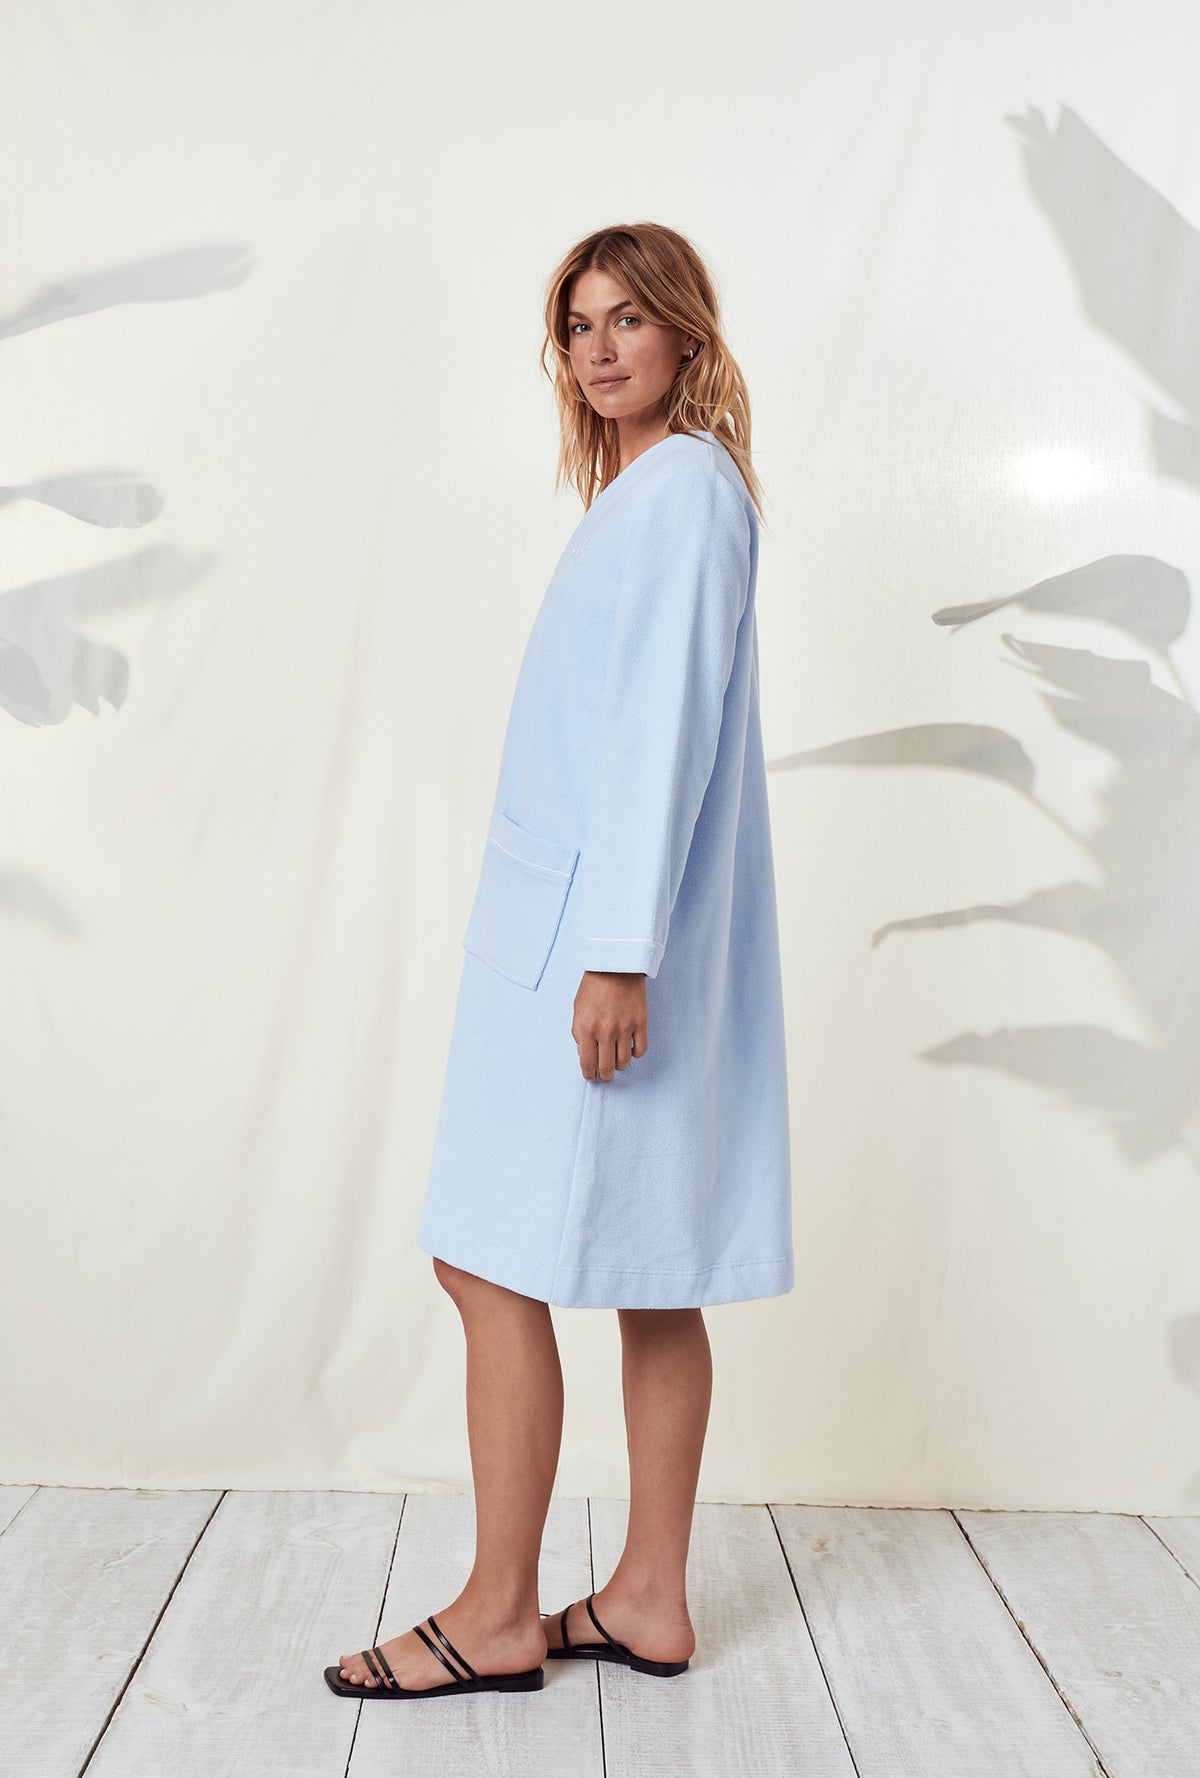 A lady wearing a terry blue long sleeve spa soft zip robe